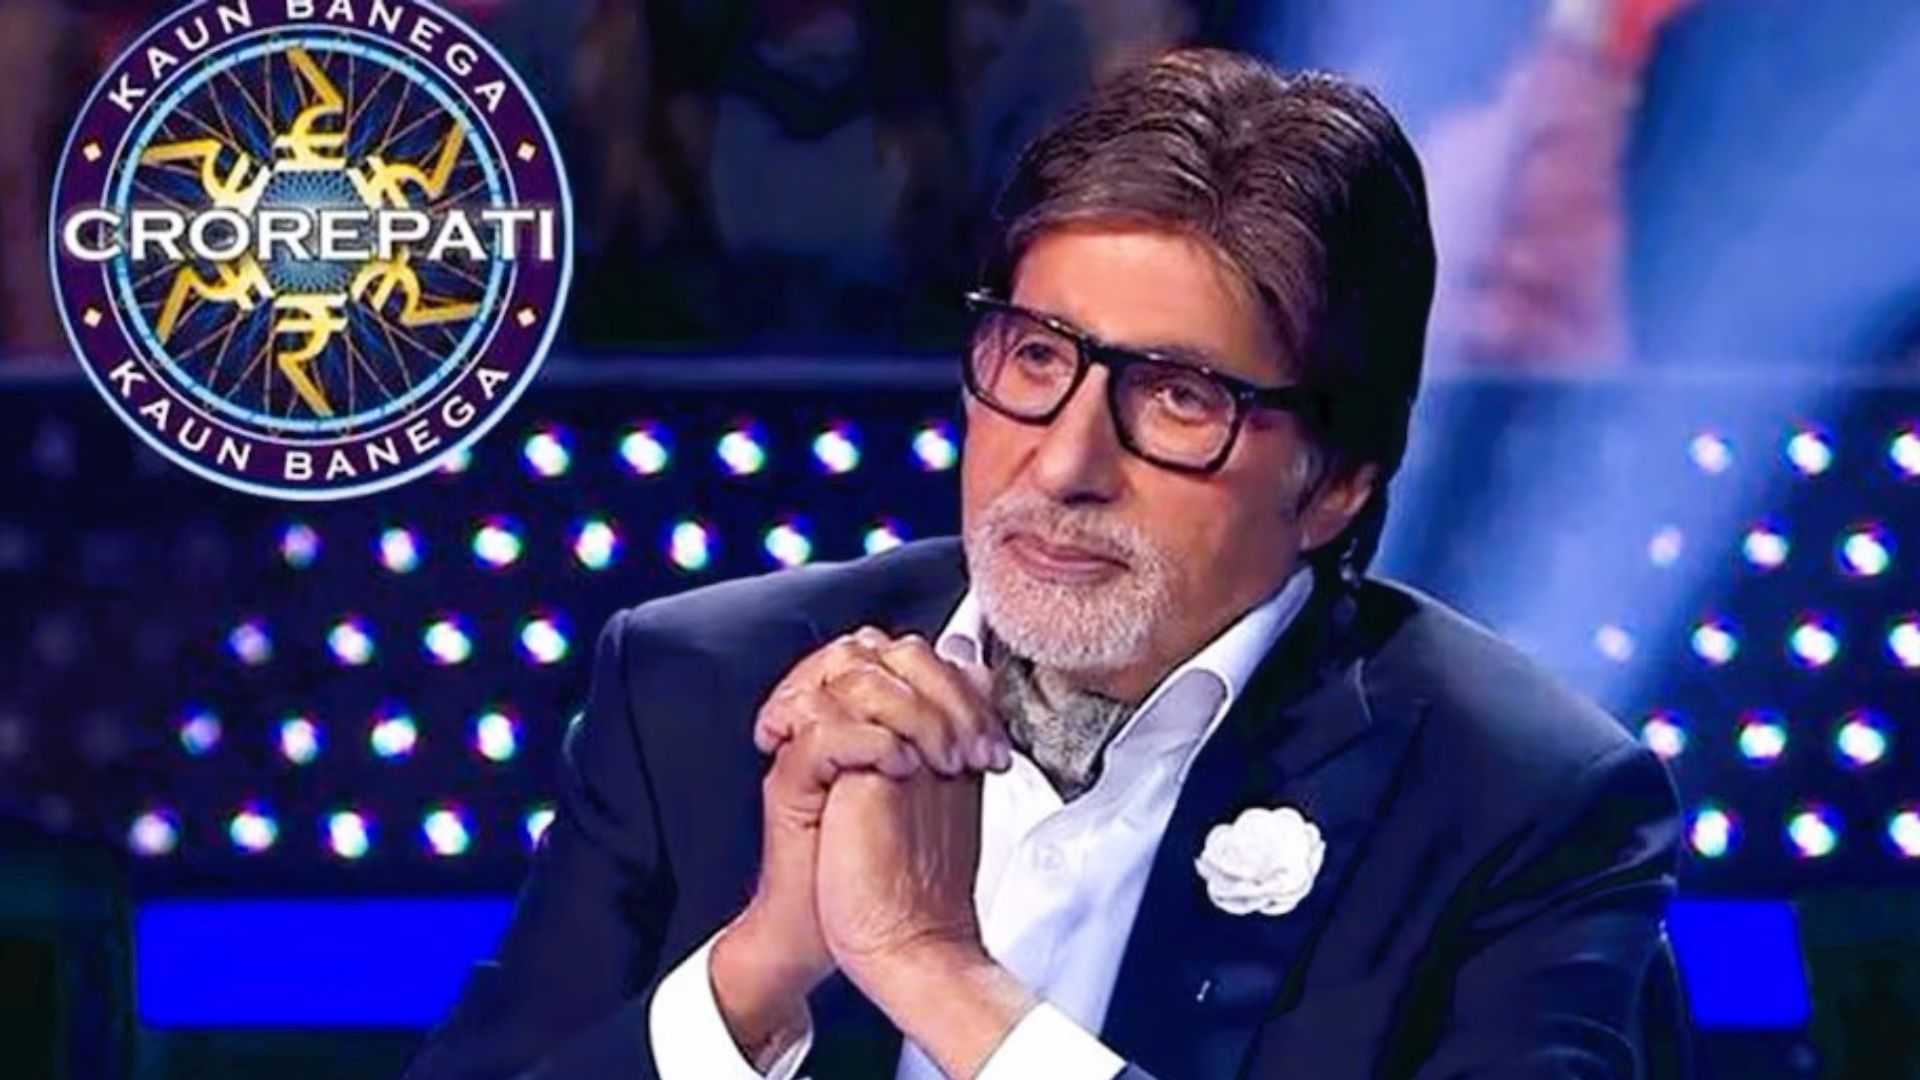 Amitabh Bachchan undergoes angioplasty at Kokilaben Hospital in Mumbai, here's what we know